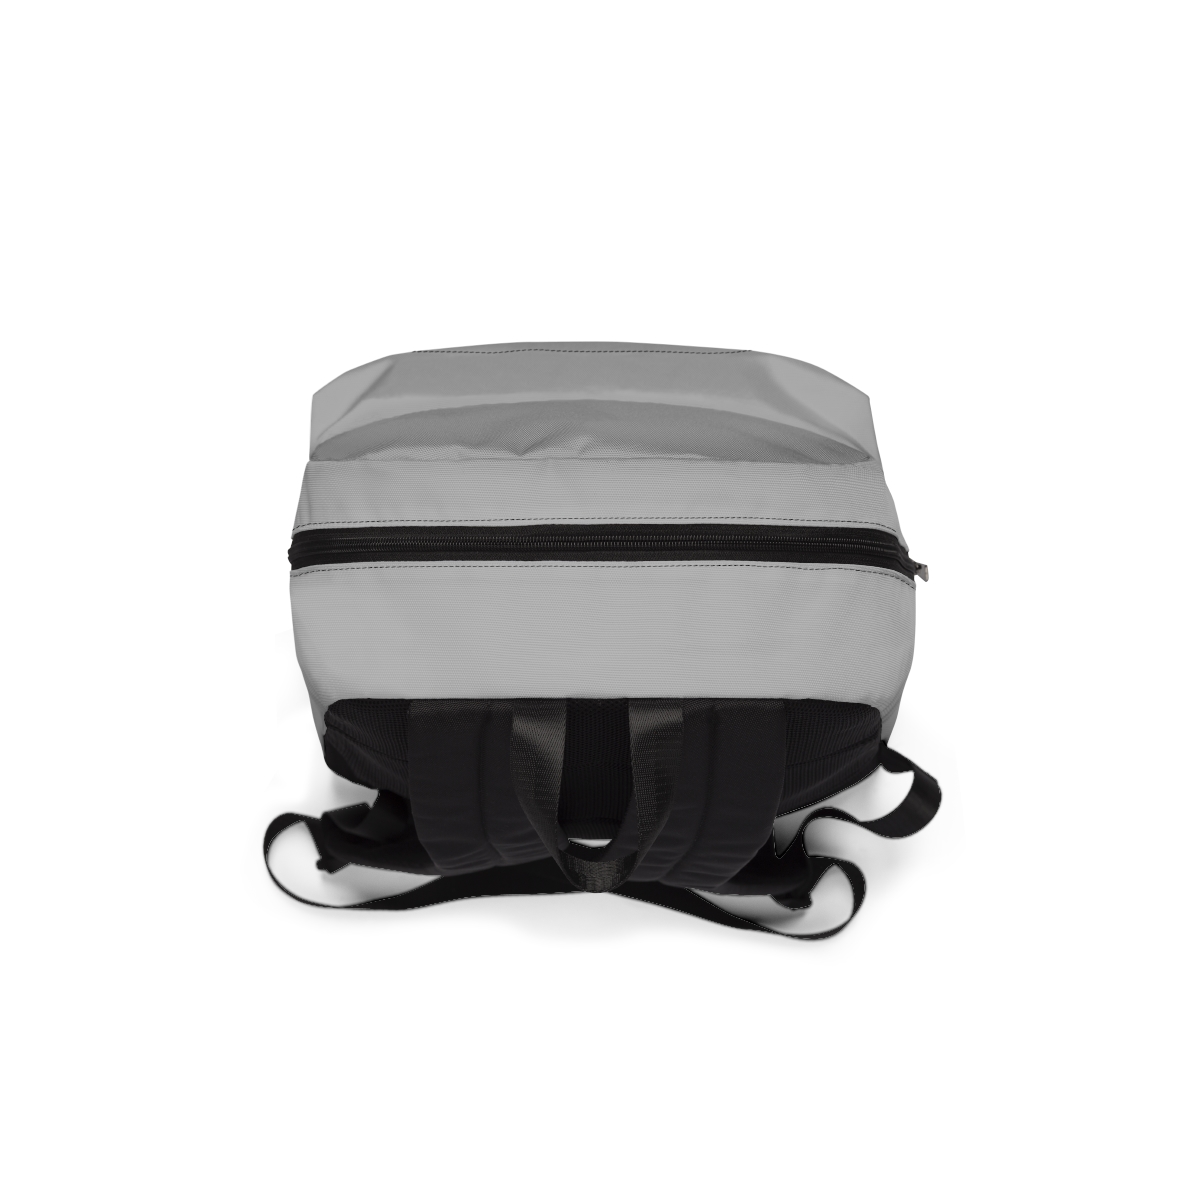 Copy of Unisex Classic Backpack product thumbnail image